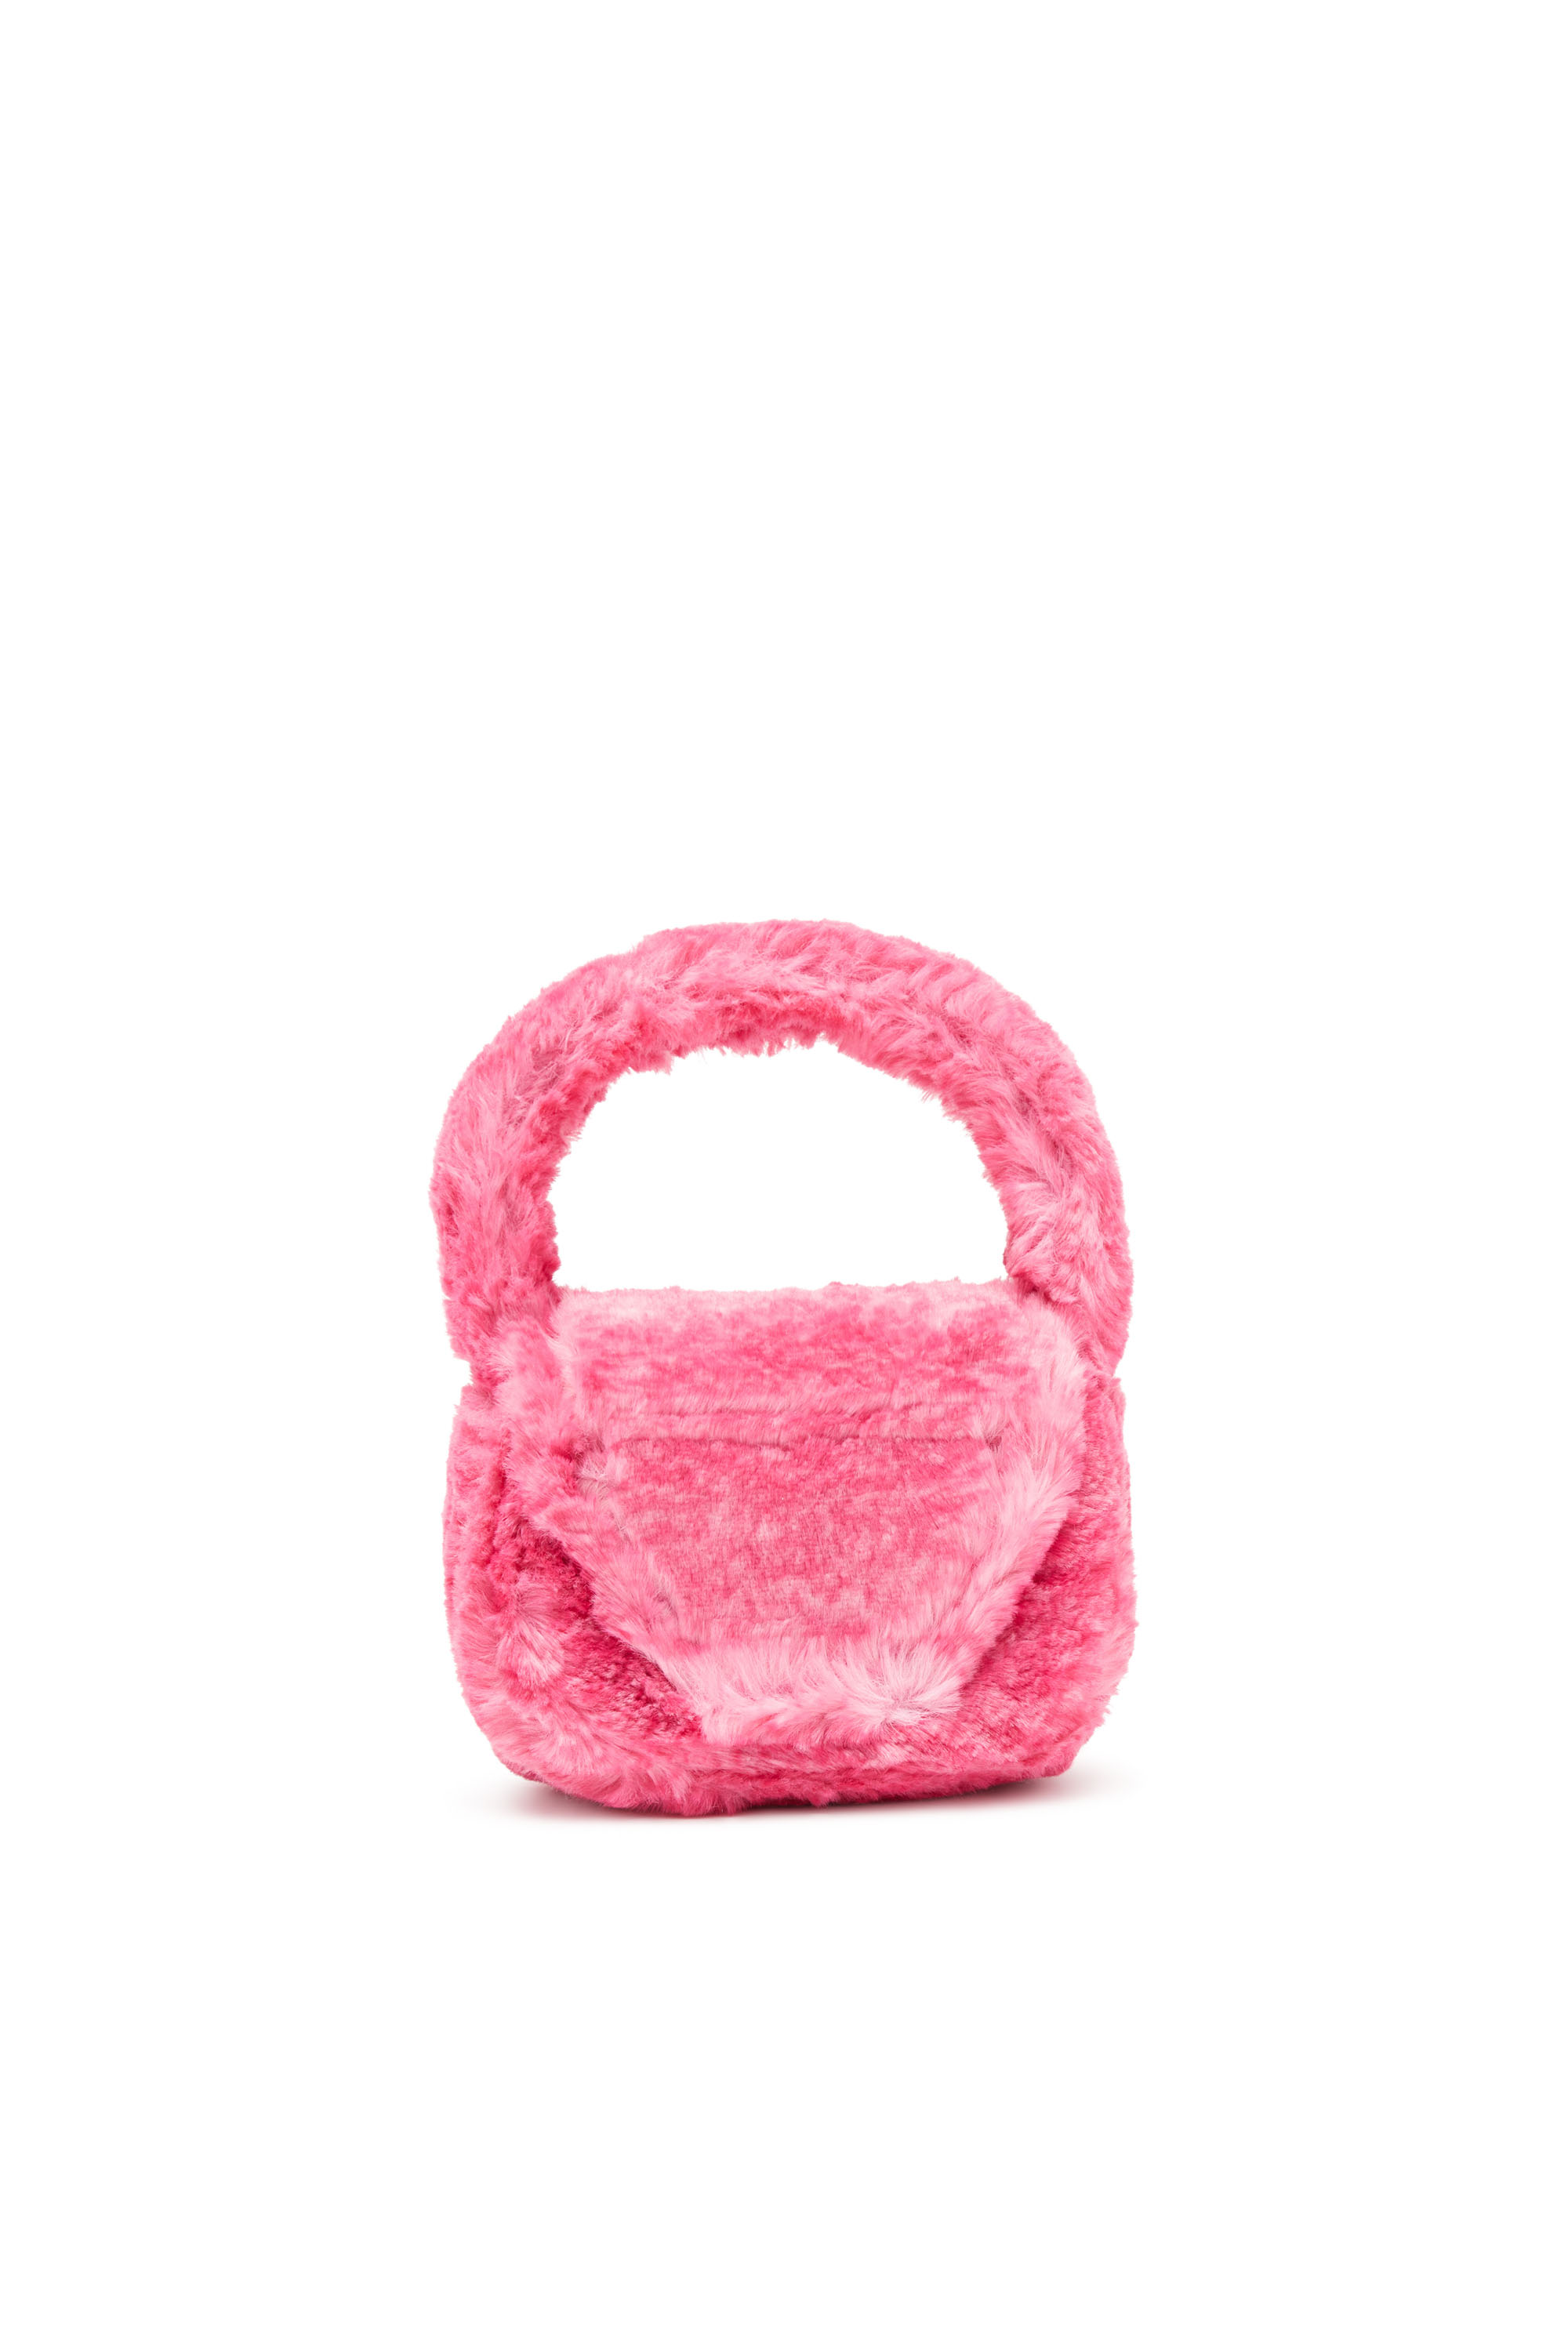 Diesel - 1DR XS, Woman 1DR Xs-Fluffy iconic mini bag in Pink - Image 2